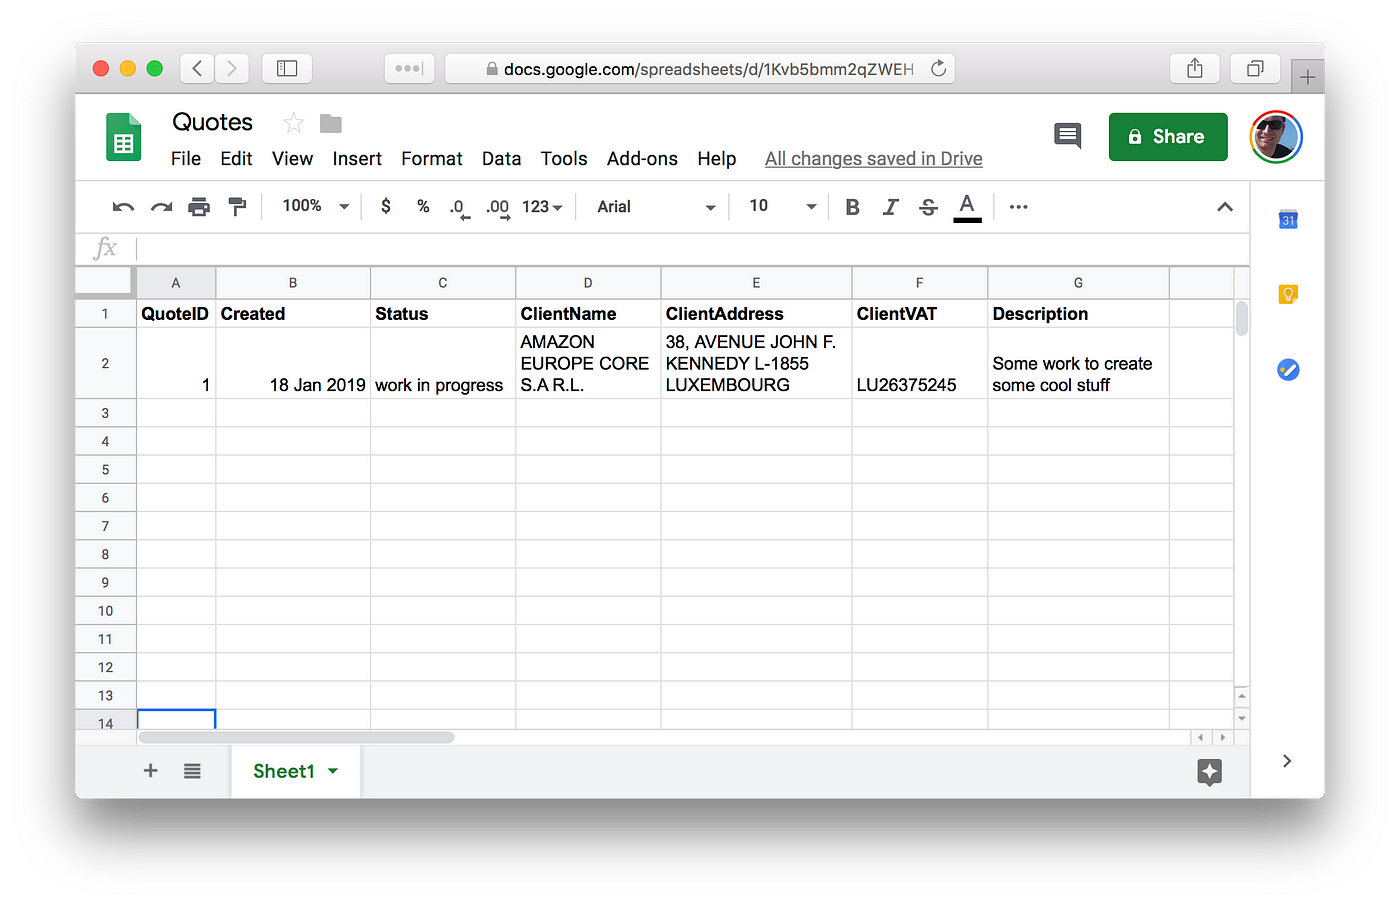 generating-documents-from-google-sheets-with-python-by-python-porto